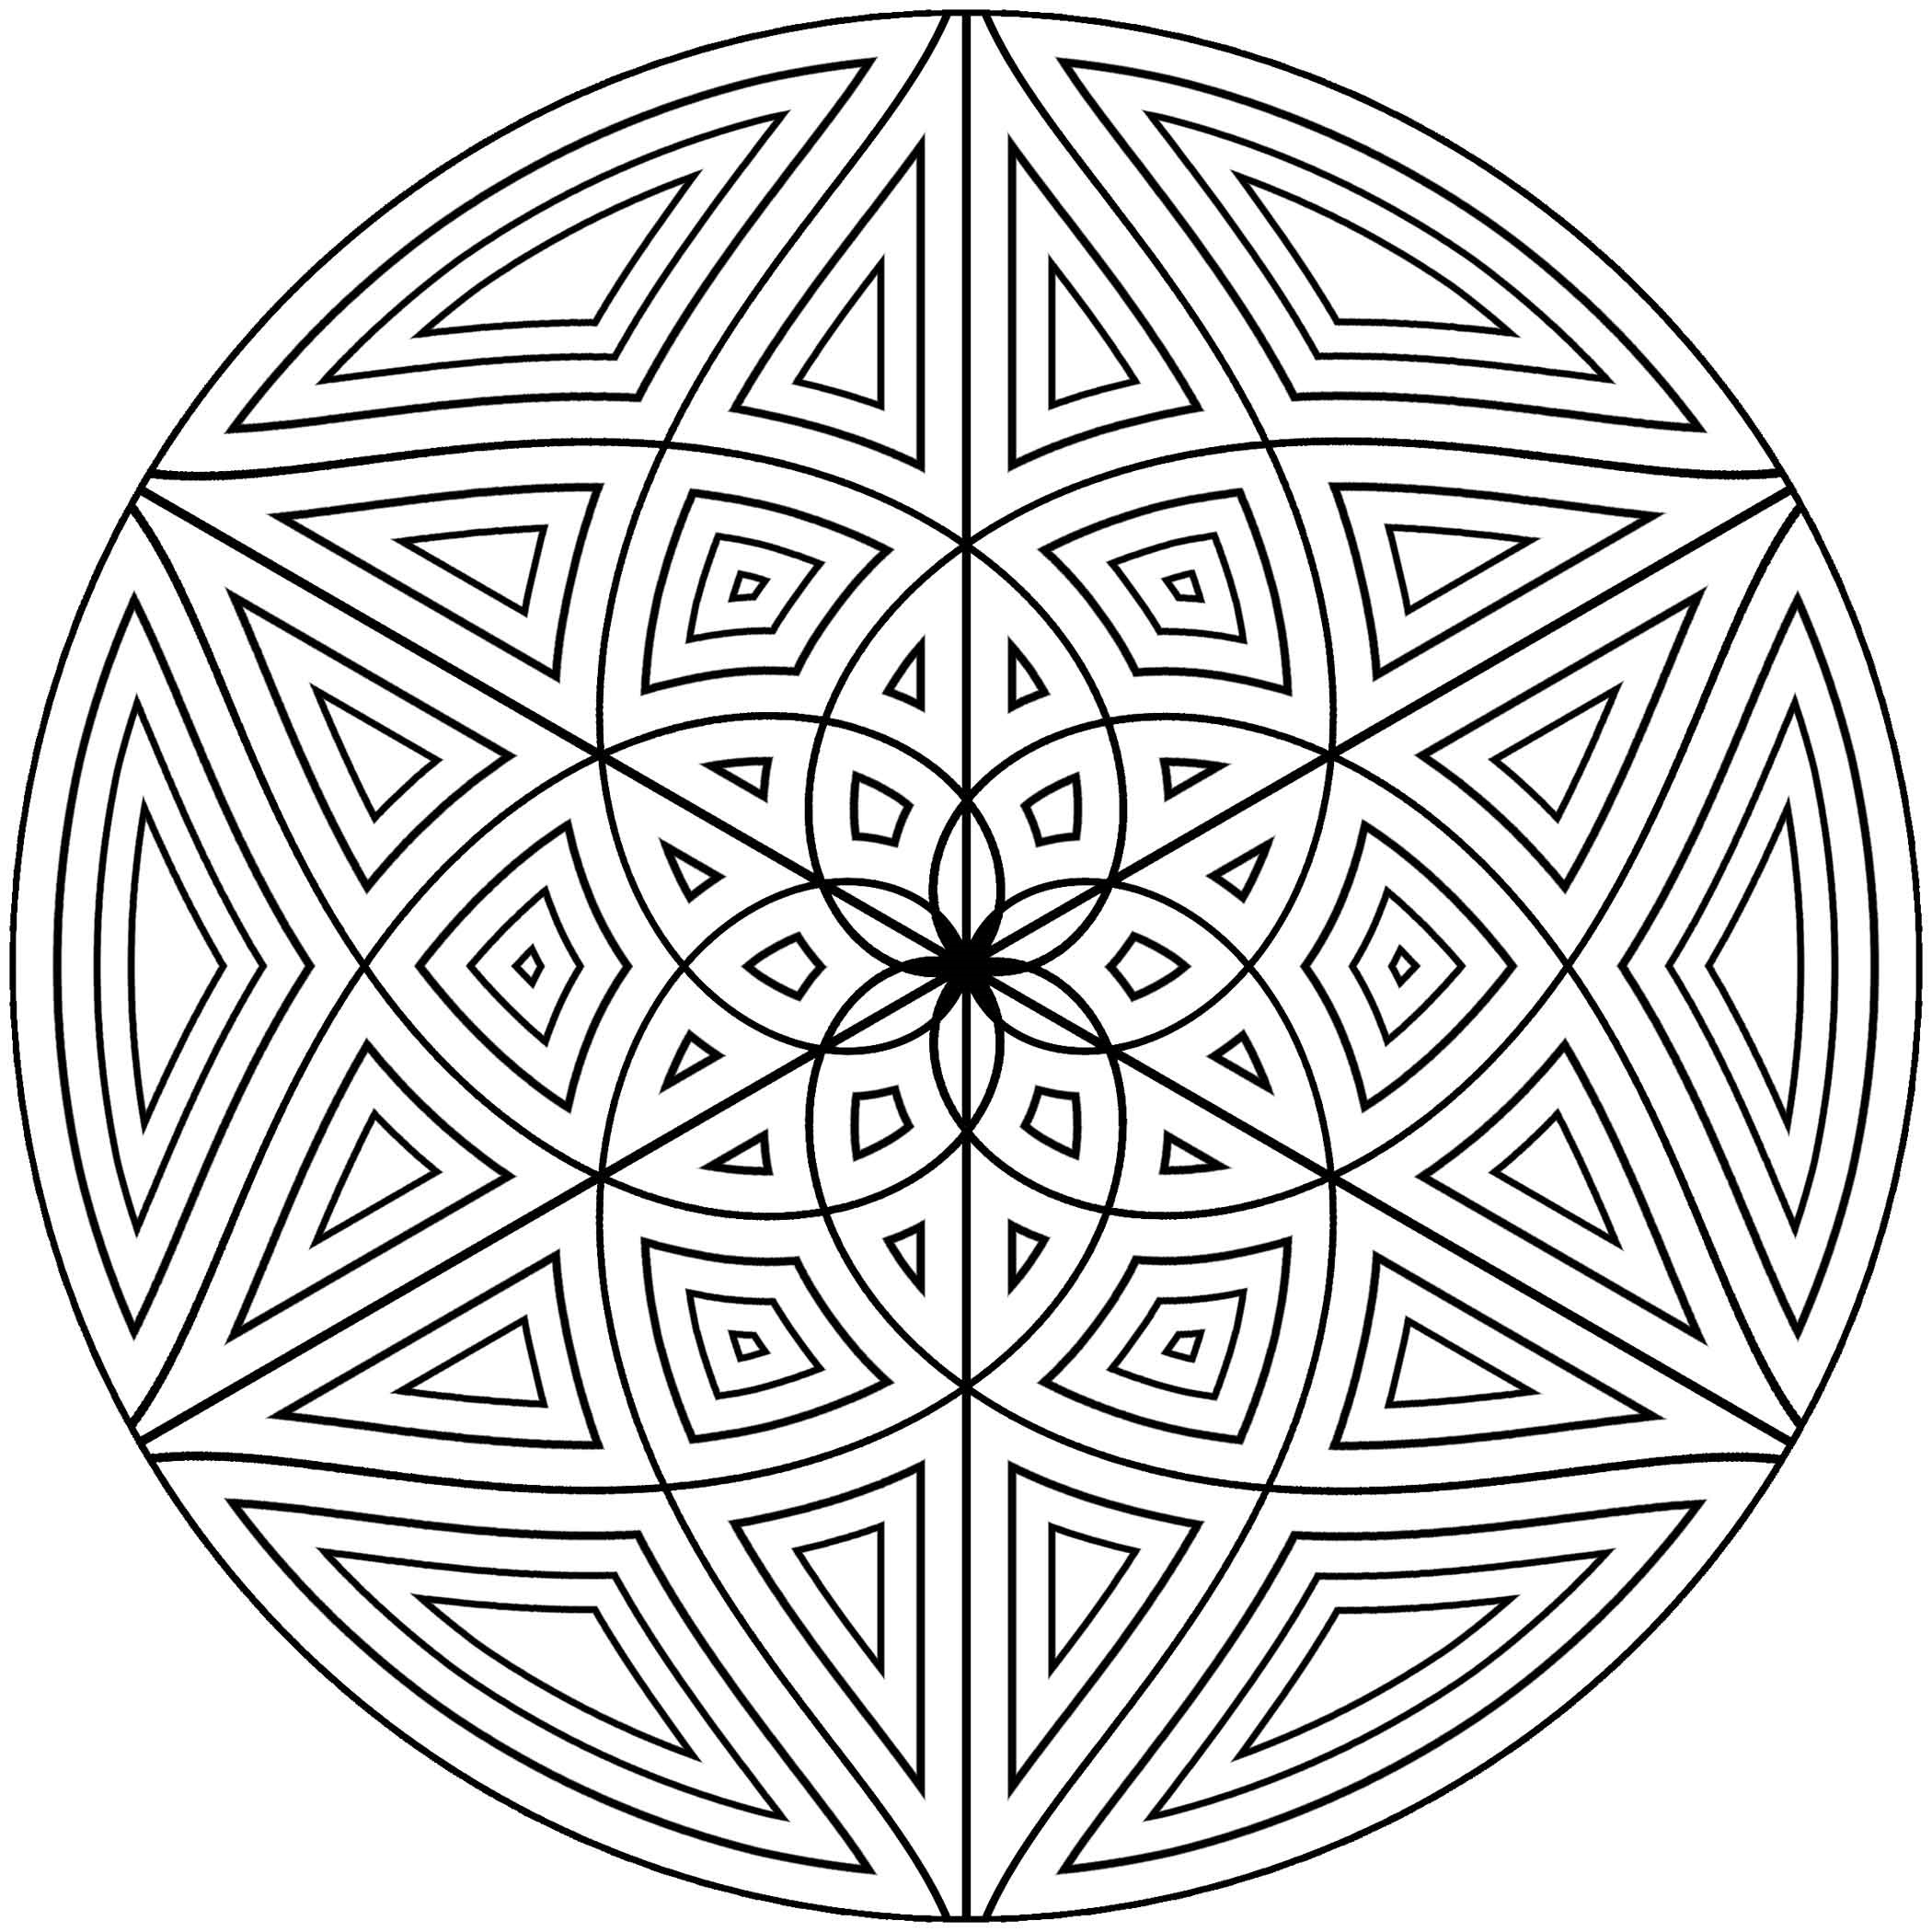  Geometric Coloring Pages for Adults to Color